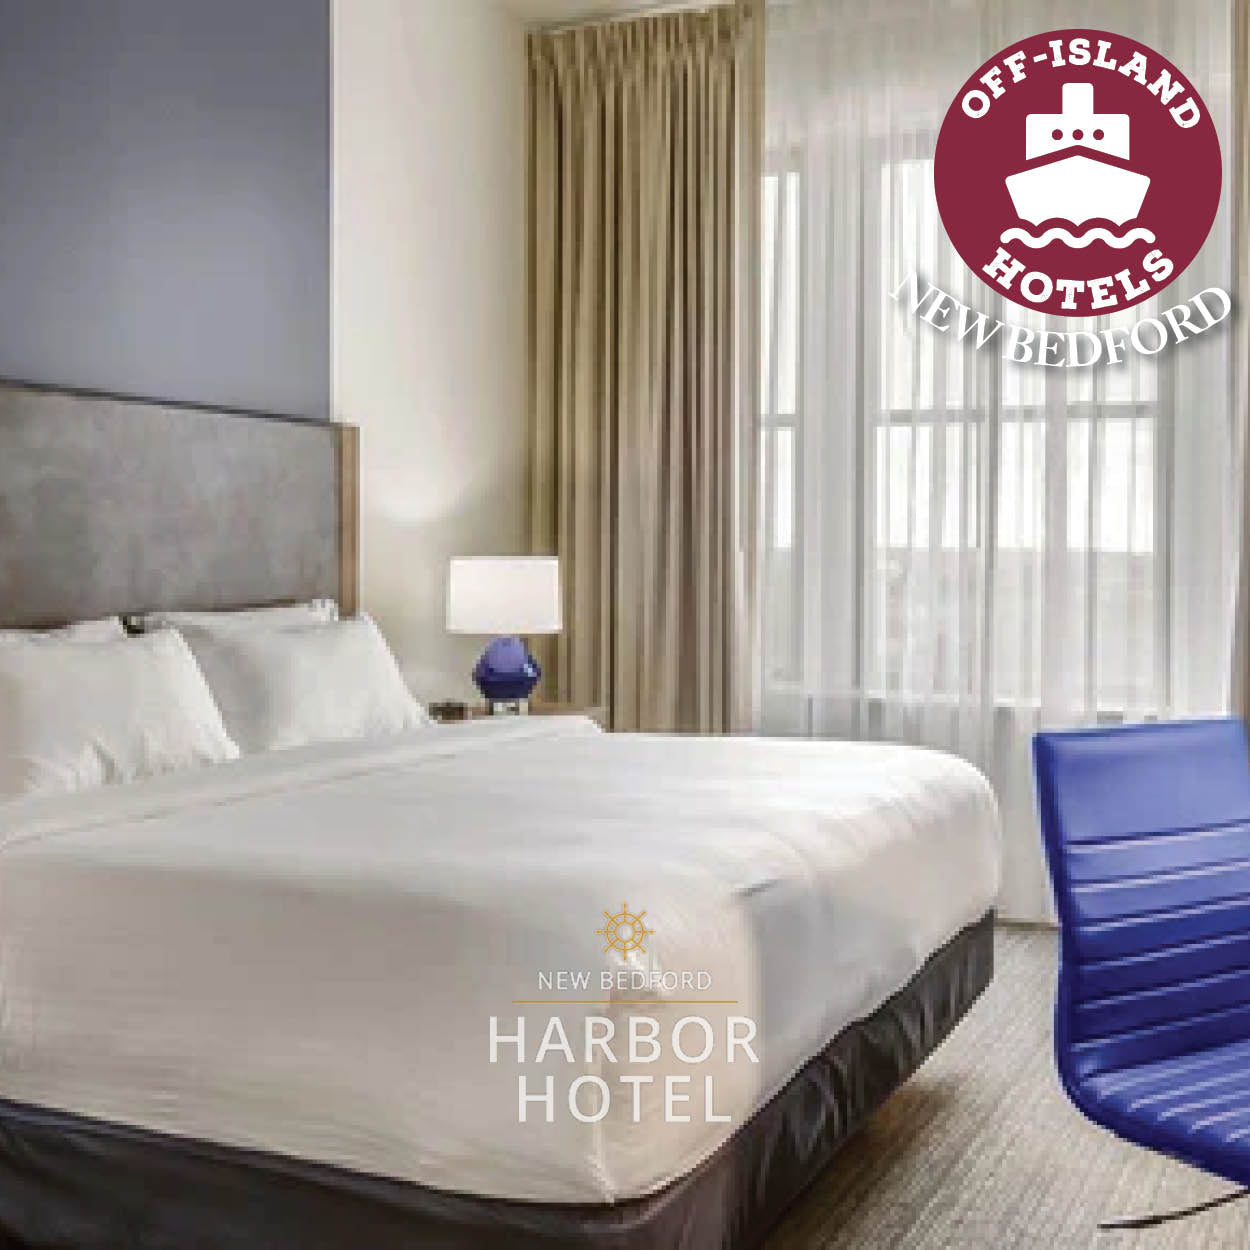 One King Guest Room at New Bedford Harbor Hotel Package